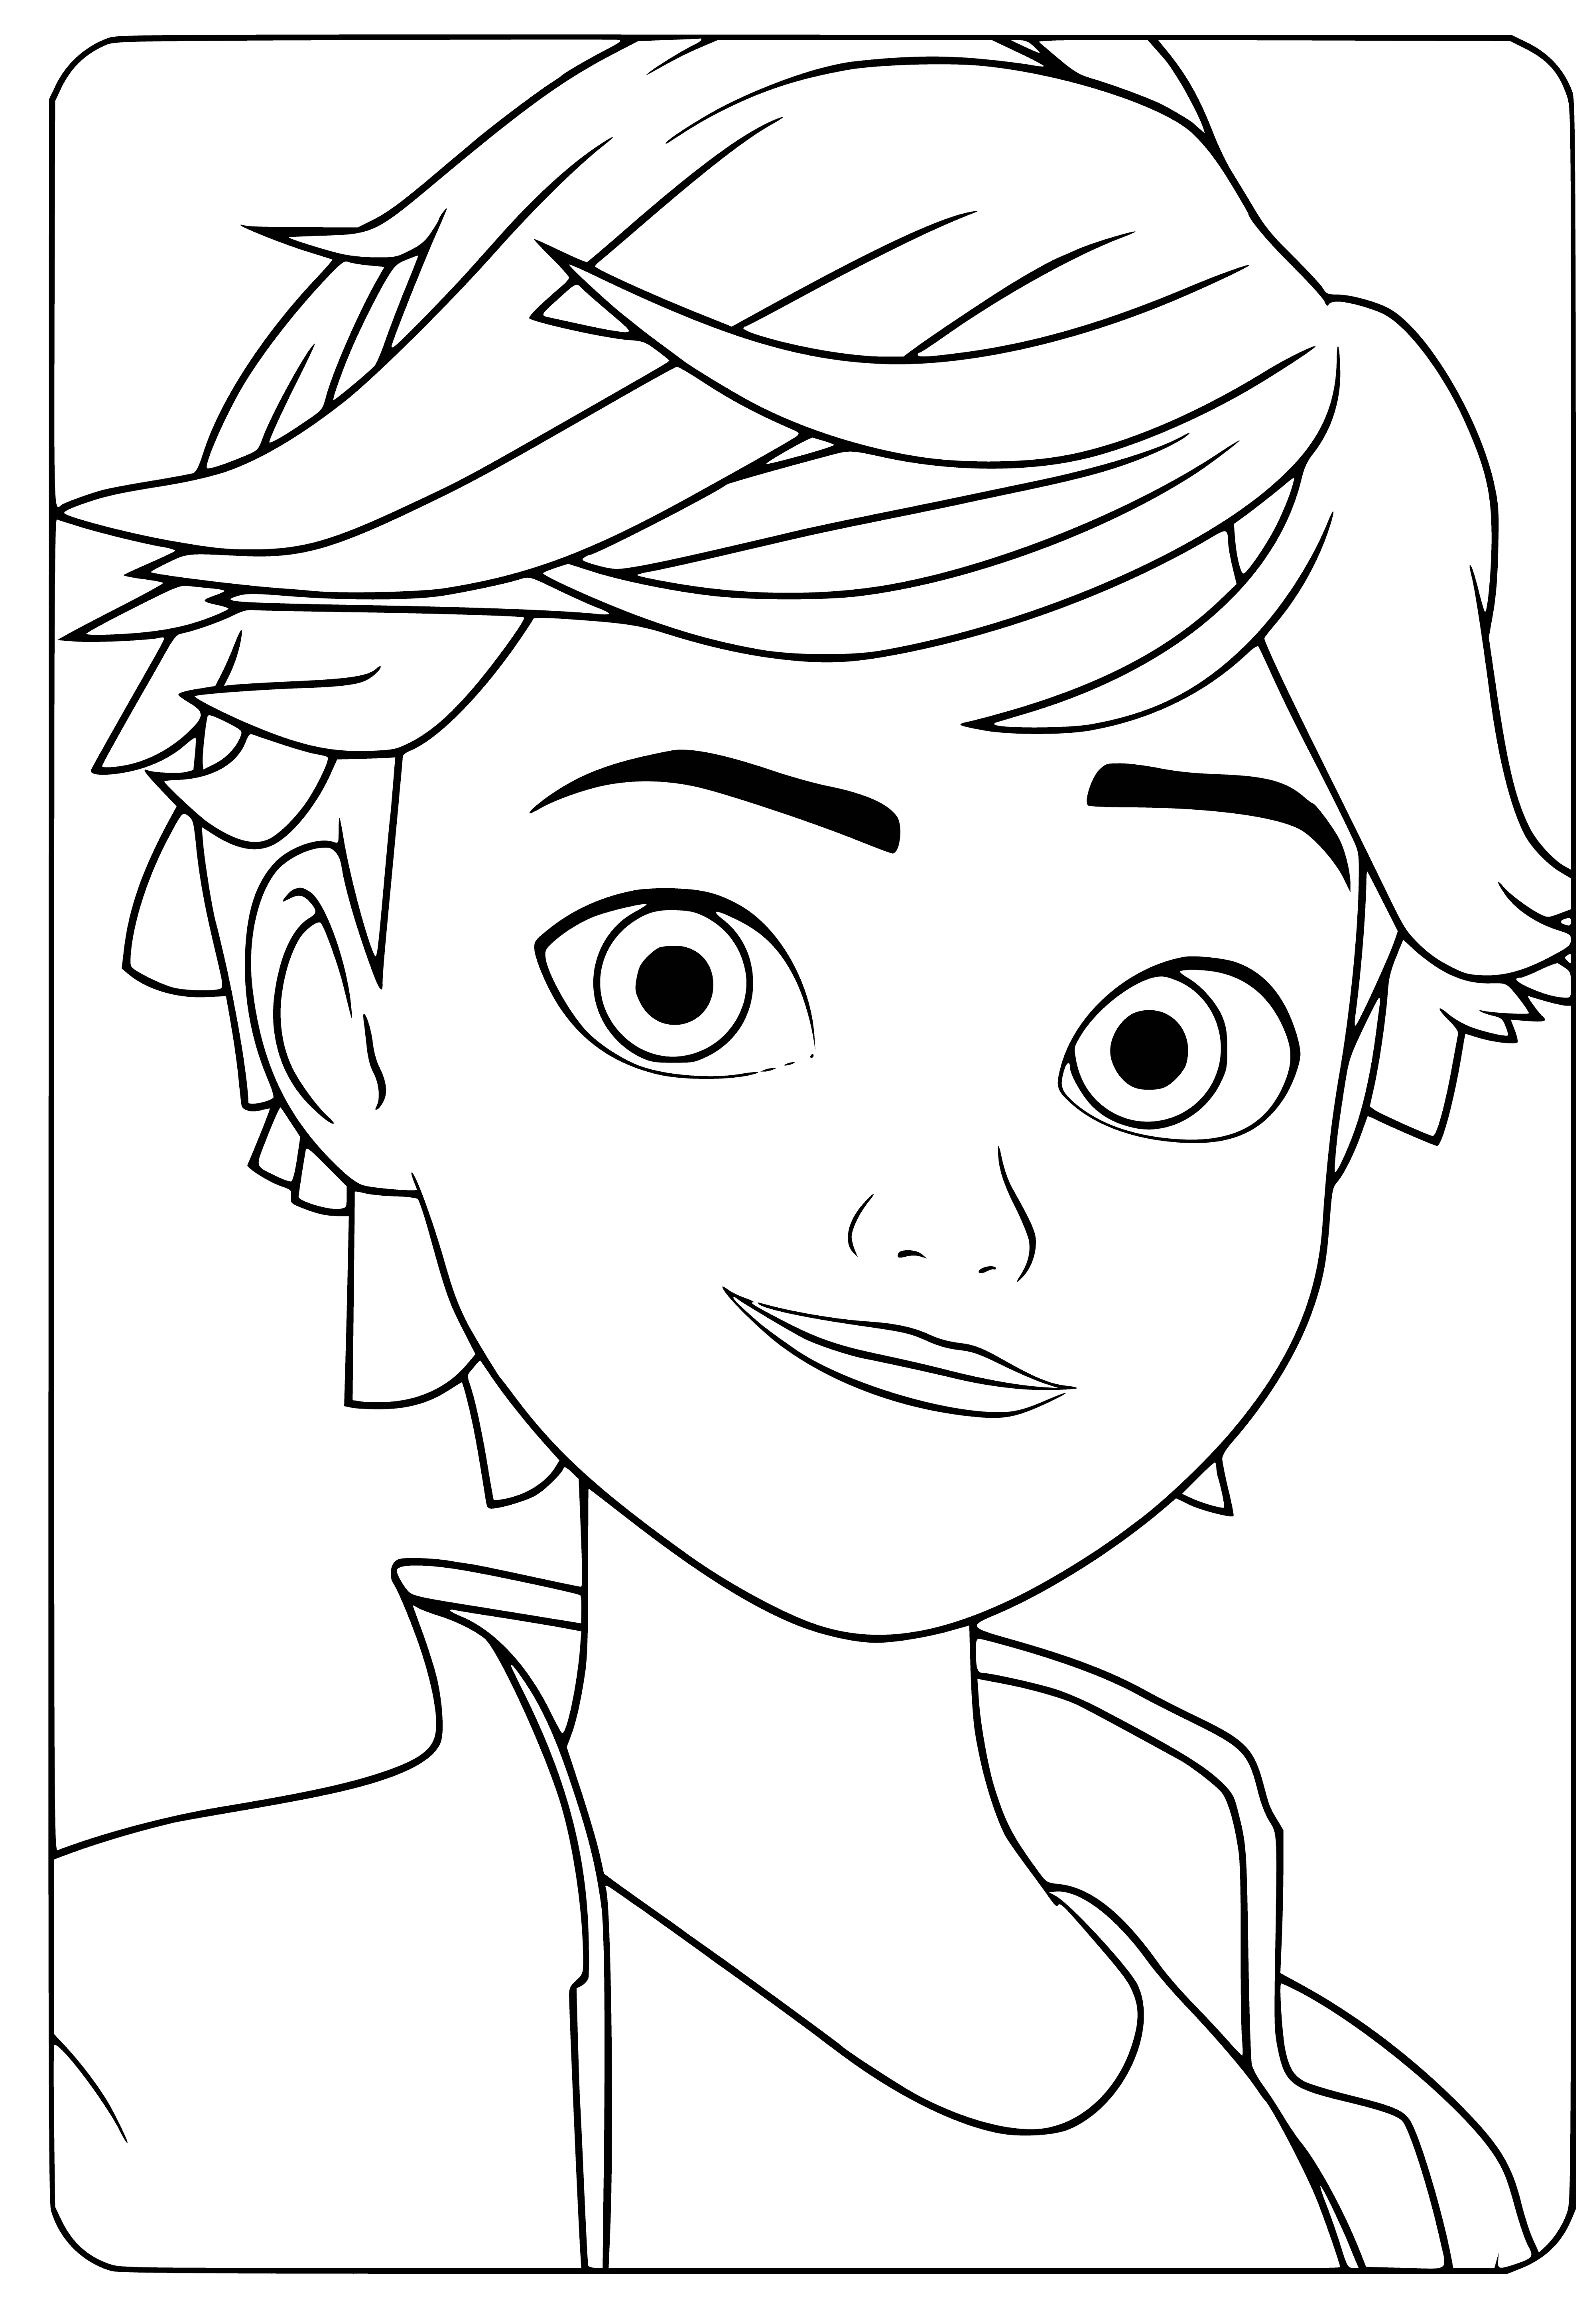 Adrian coloring page